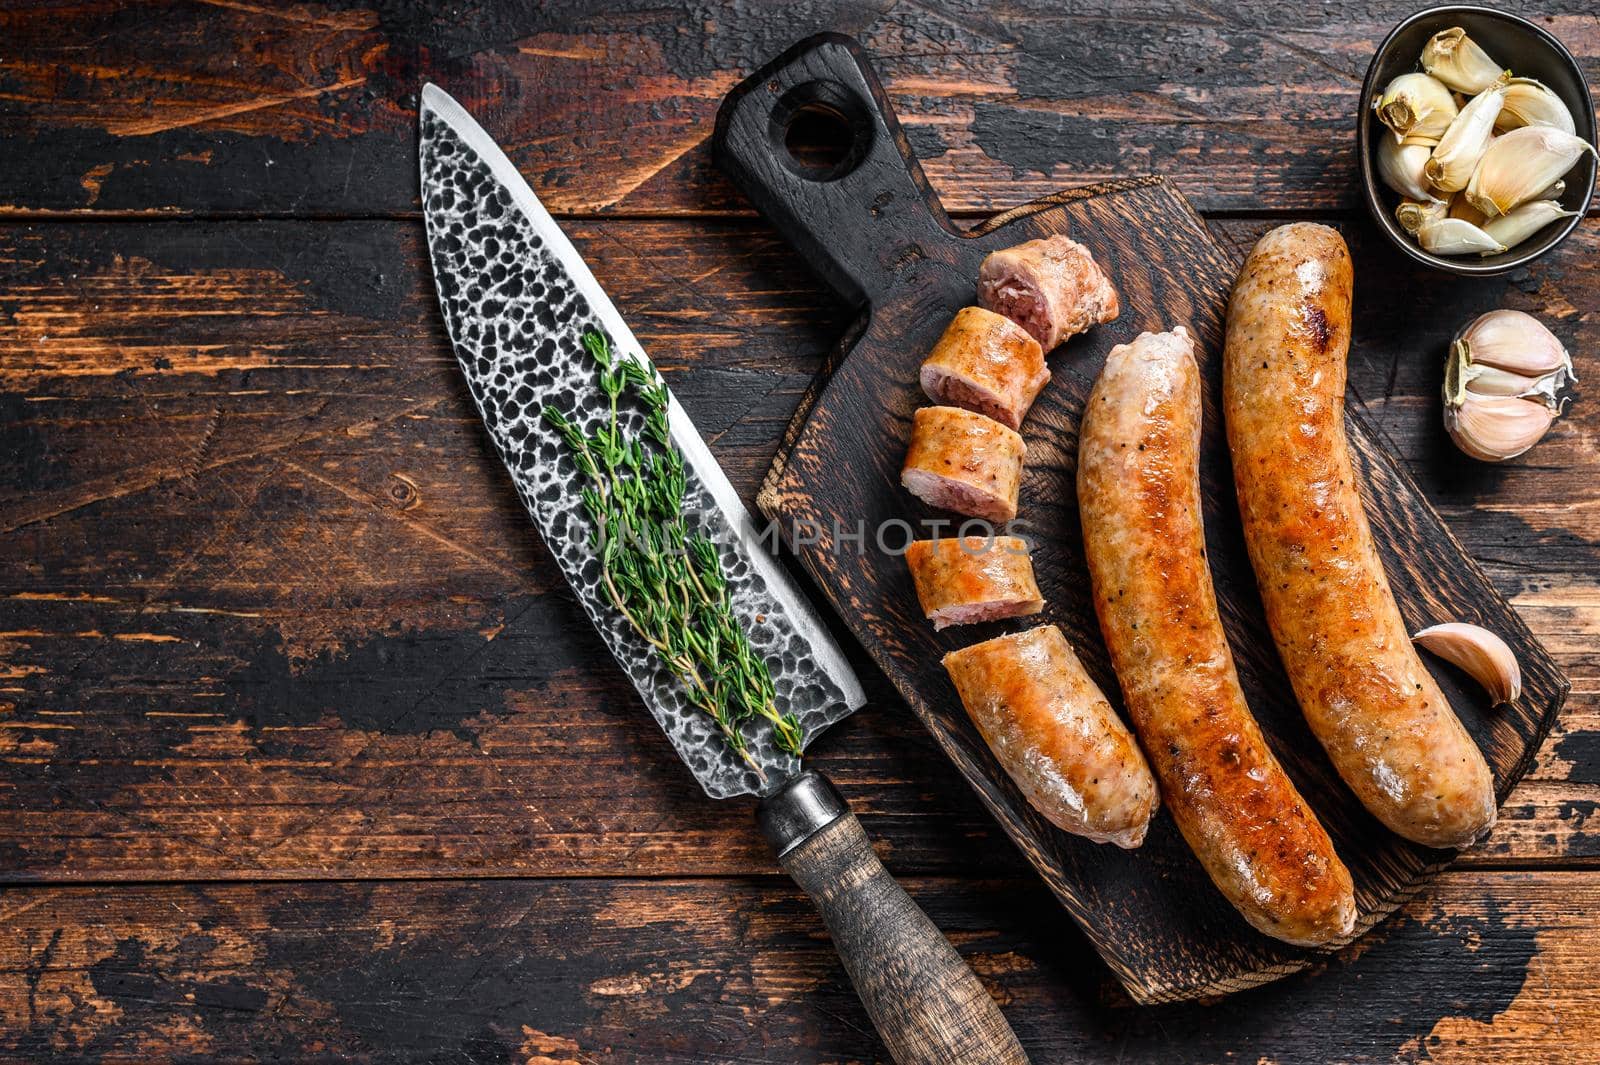 Fried and sliced pork Sausage with herbs. Top view. Dark wooden background. Copy space by Composter